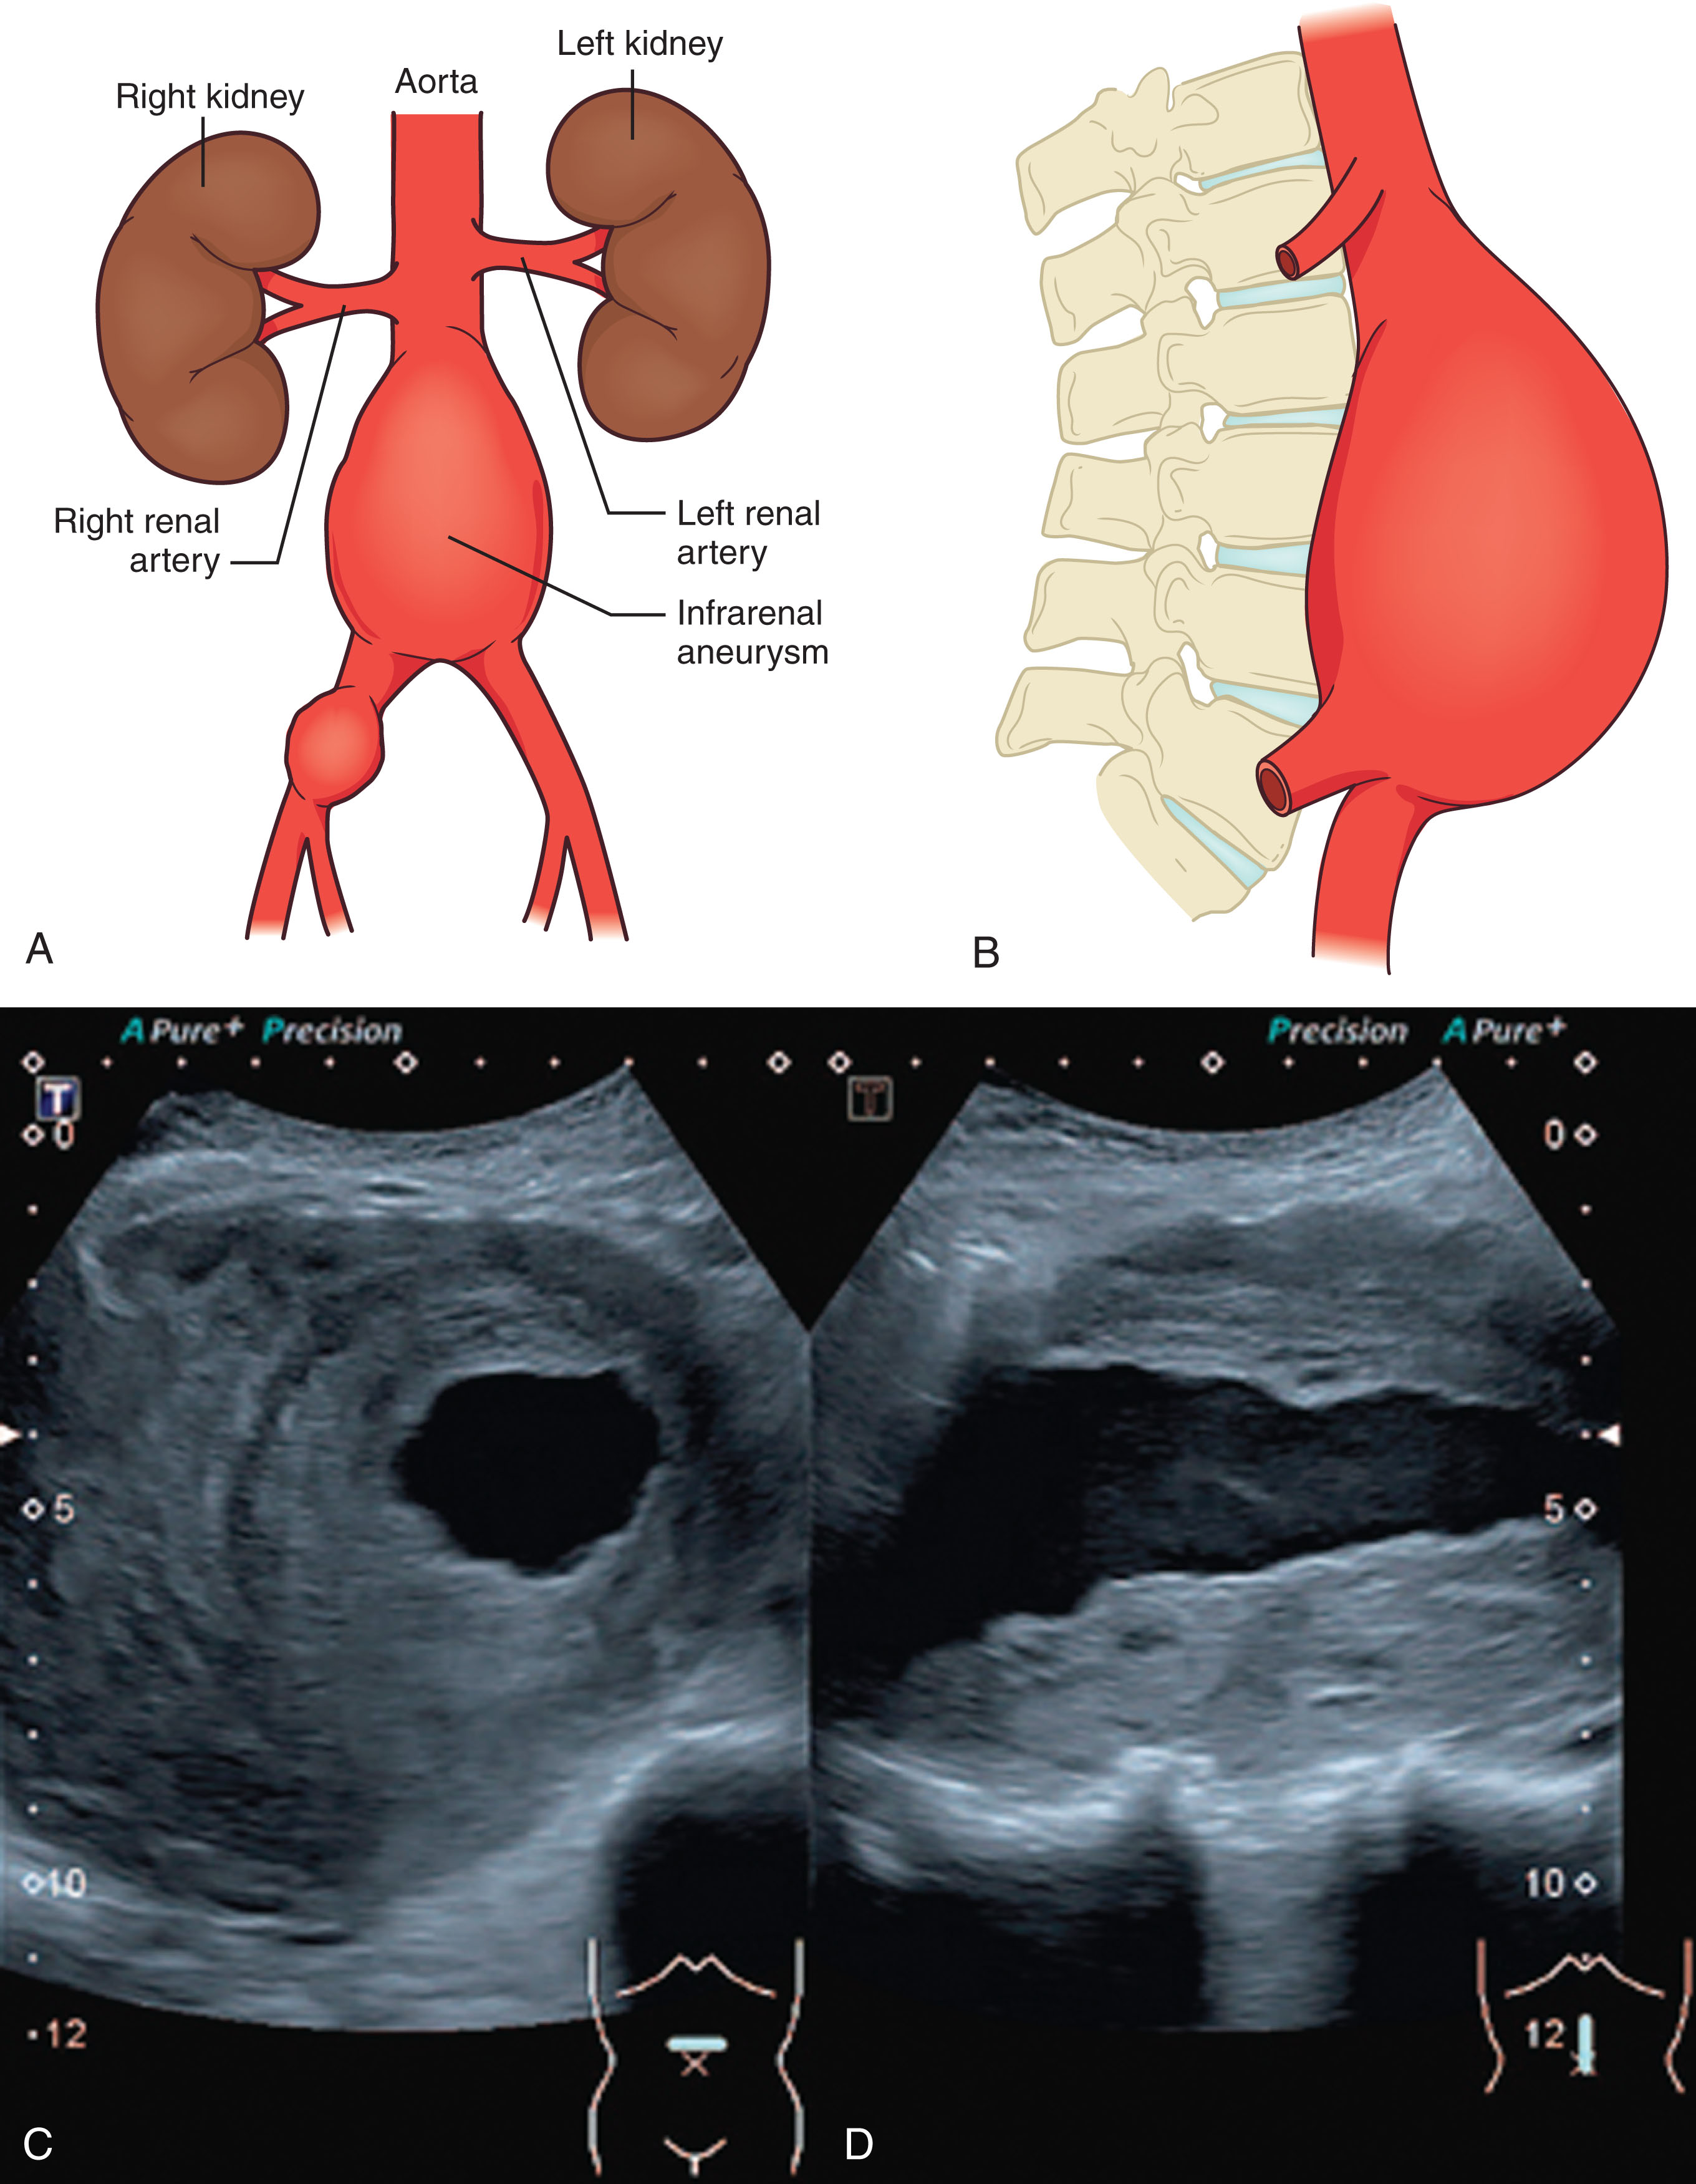 Fig. 8.28, (A–B) An aortic aneurysm is defined as that with a vessel diameter greater than 3 cm or noted focal dilation of the vessel. (C) Transverse and (D) longitudinal sonographic images of the aortic aneurysm with circumferential thrombus.